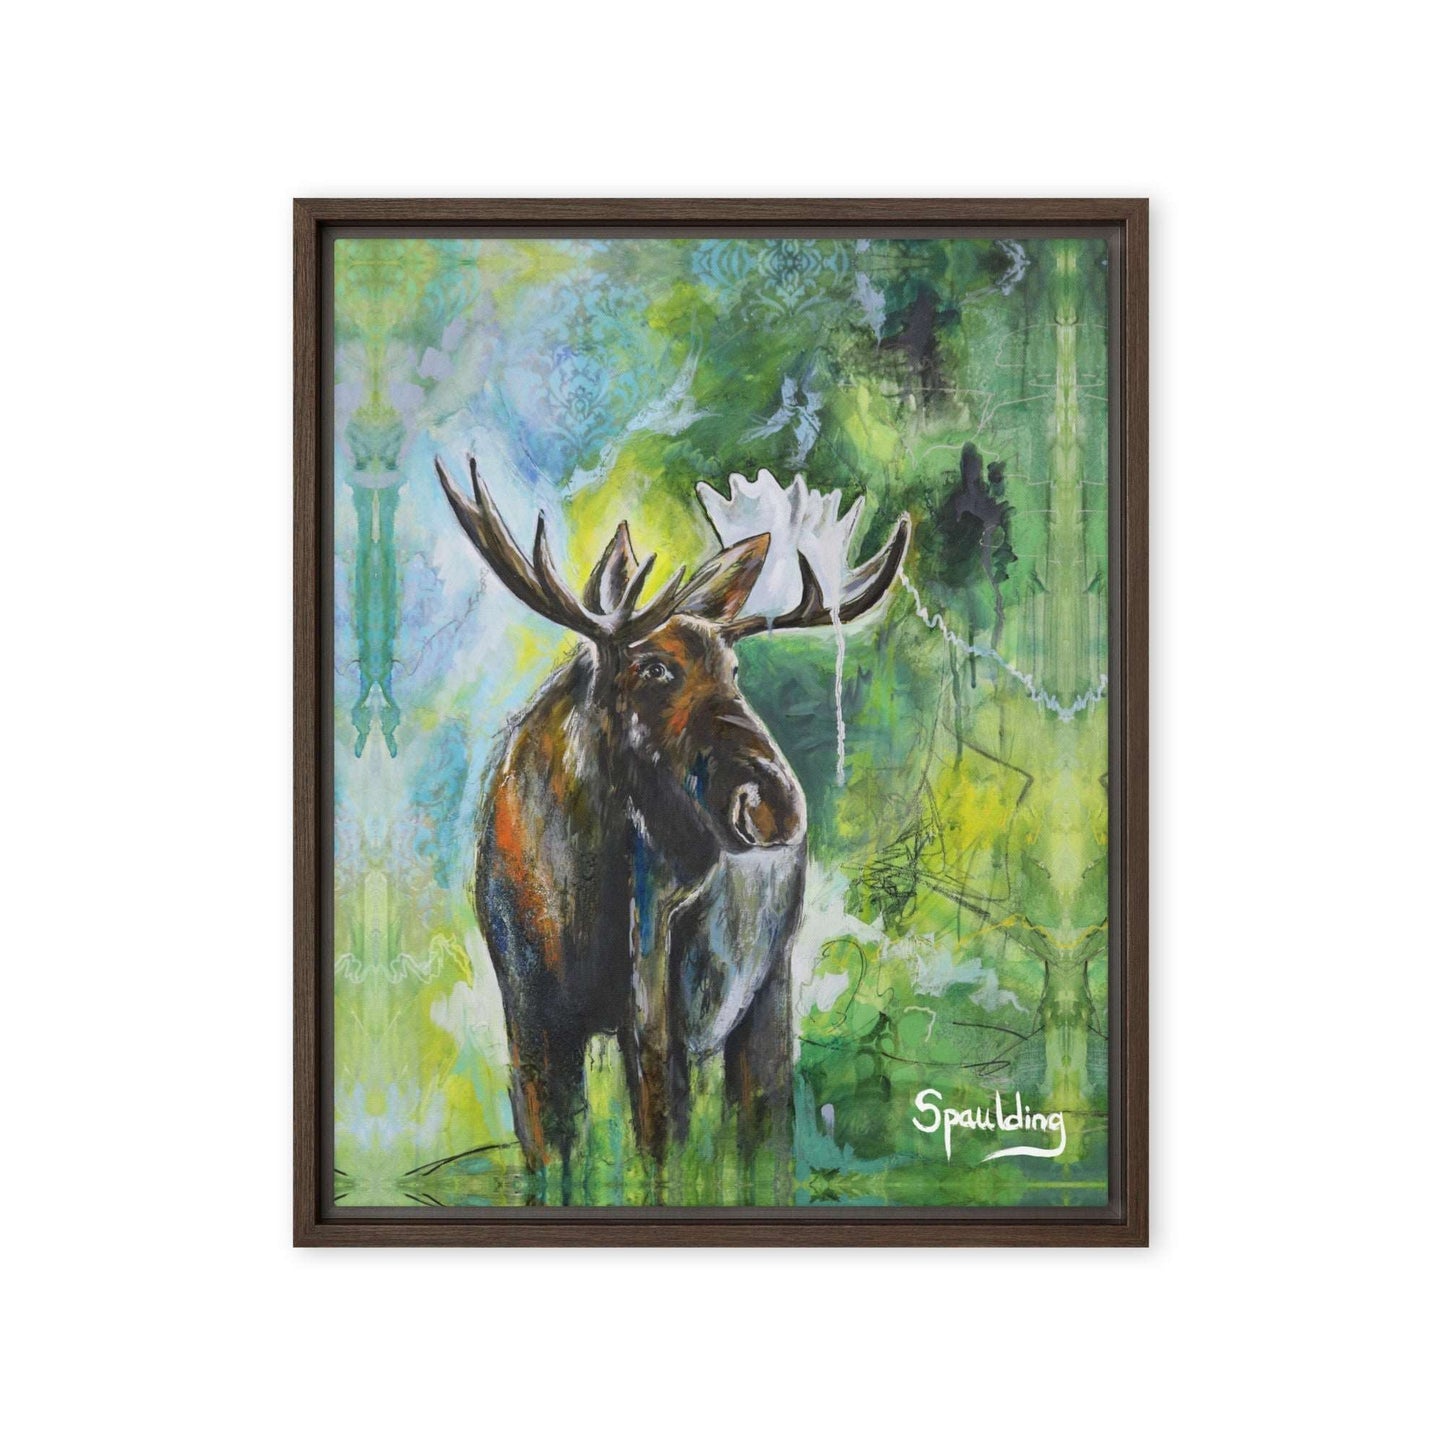 Framed canvas print of a bull moose with antlers standing in front of a green, blue and black background.